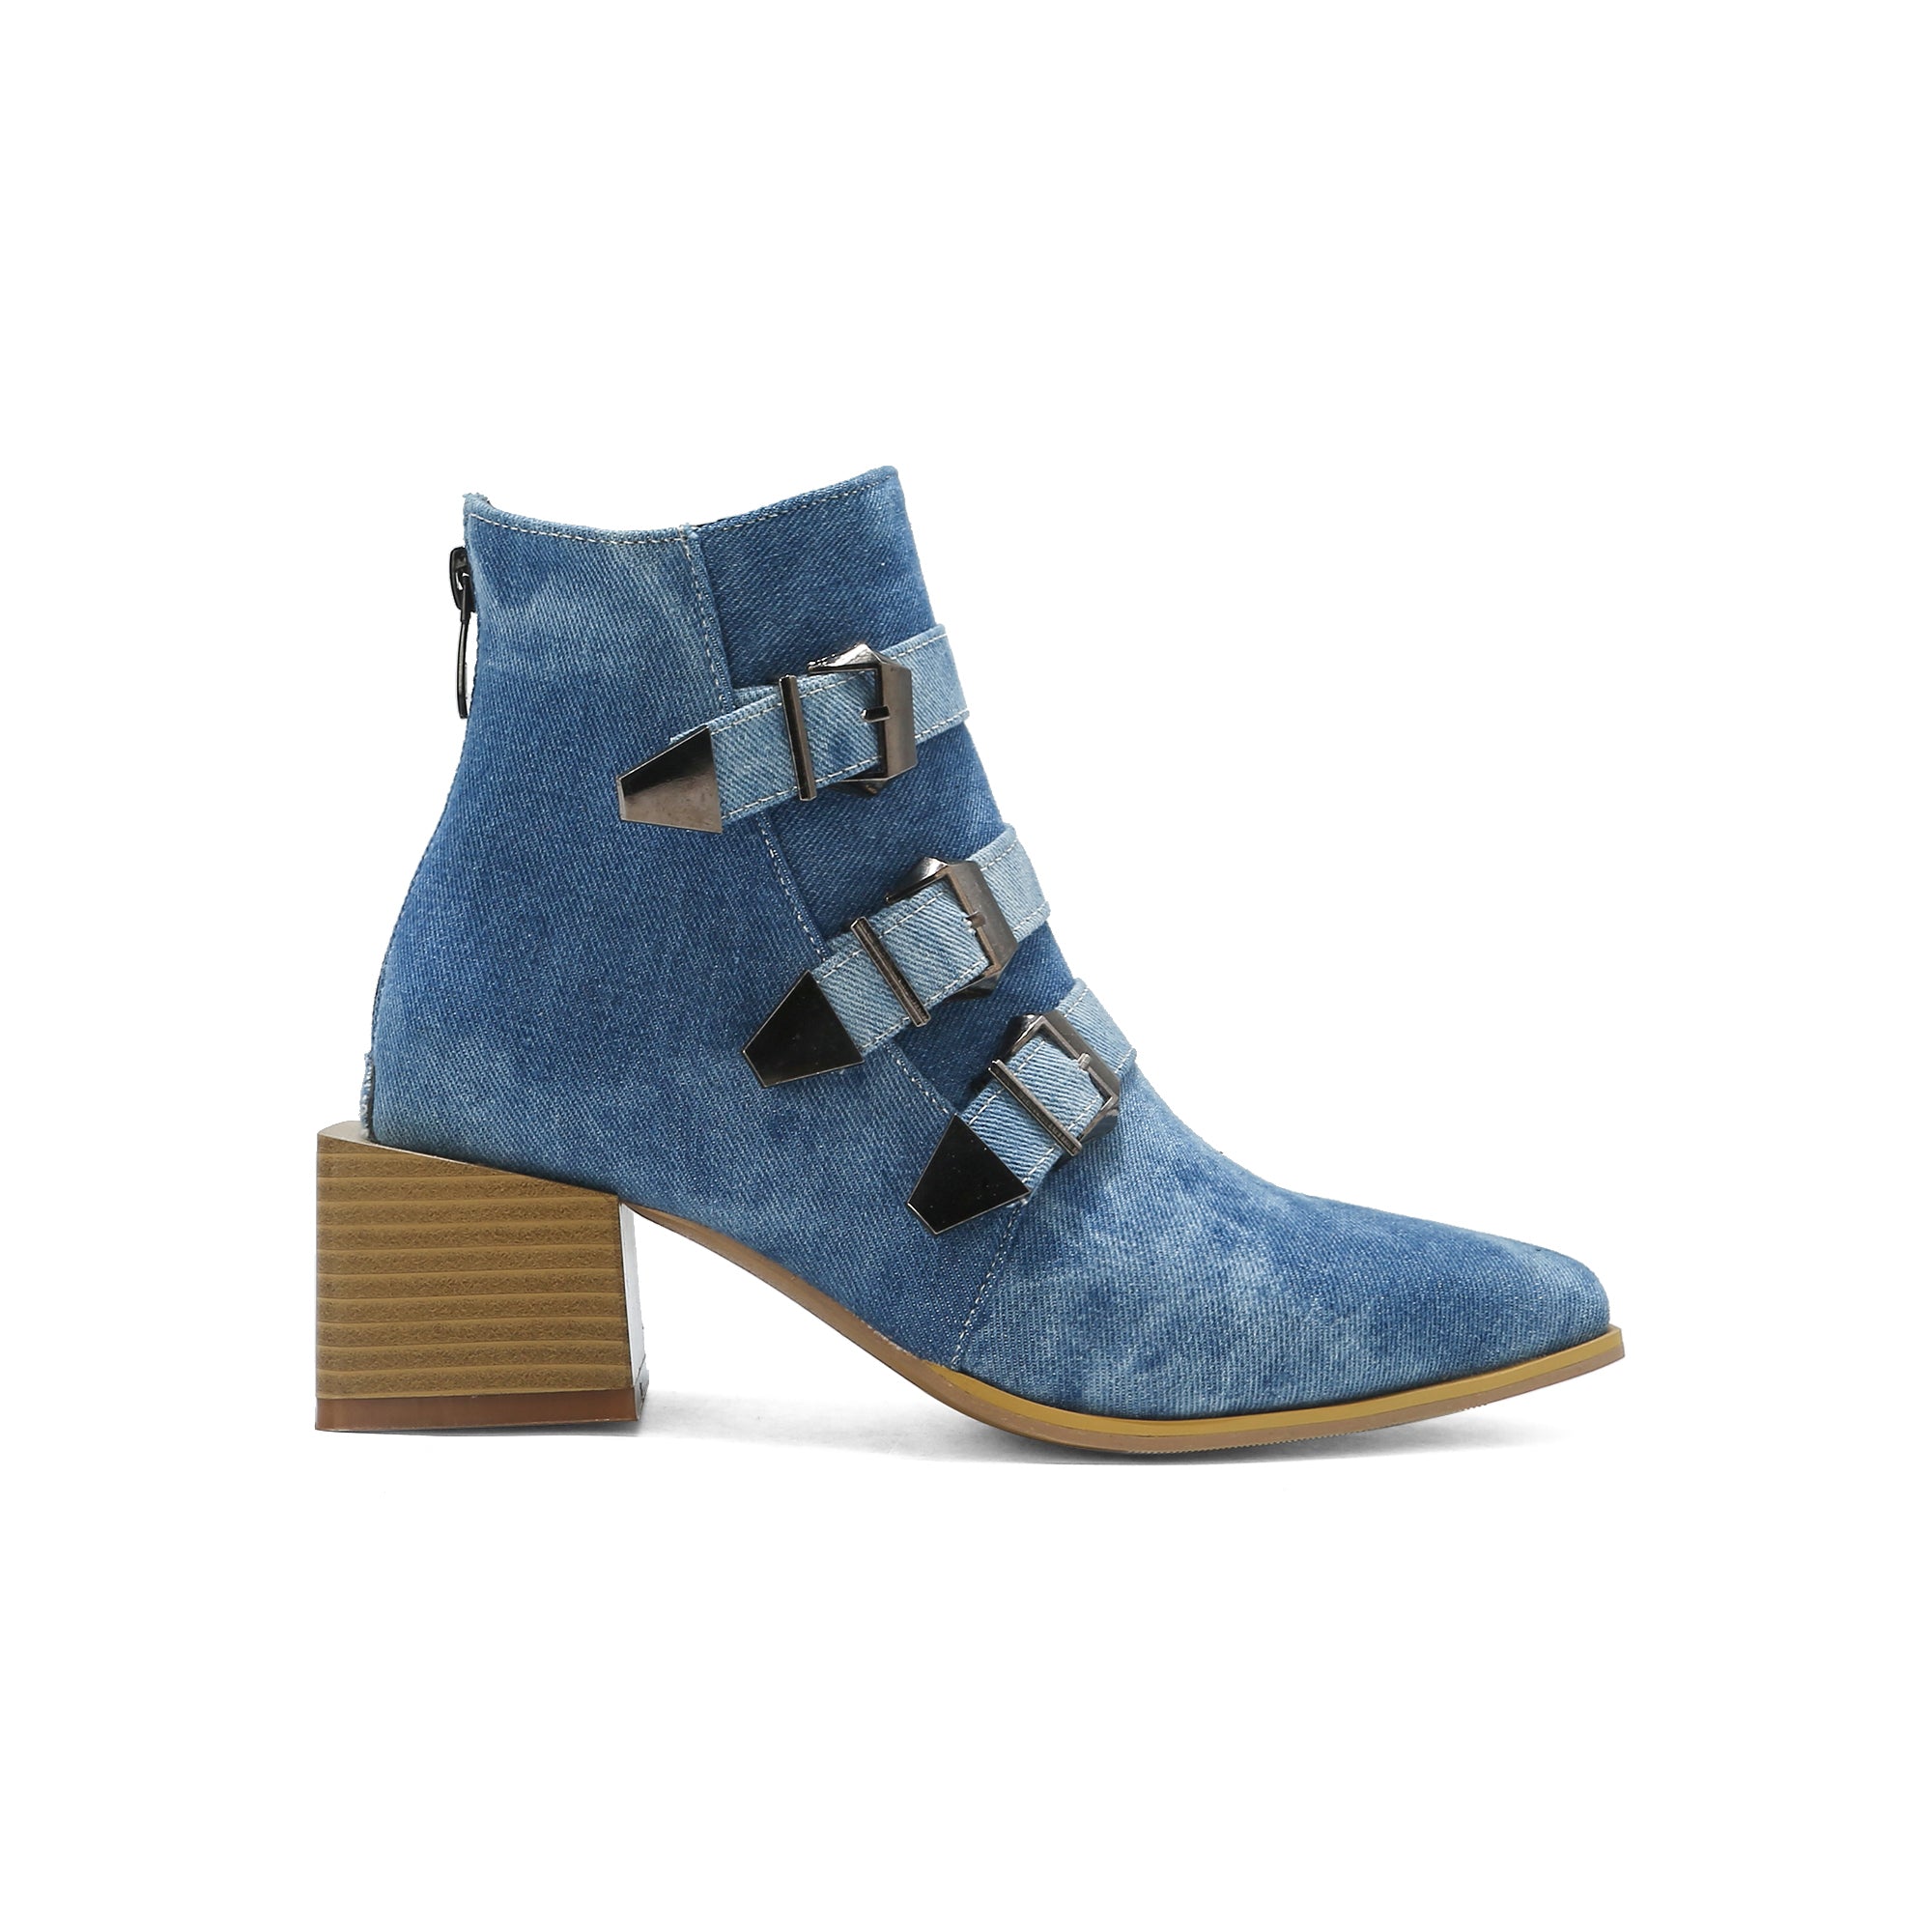 Bigsizeheels American West Chelsea ankle boots - Blue freeshipping - bigsizeheel®-size5-size15 -All Plus Sizes Available!